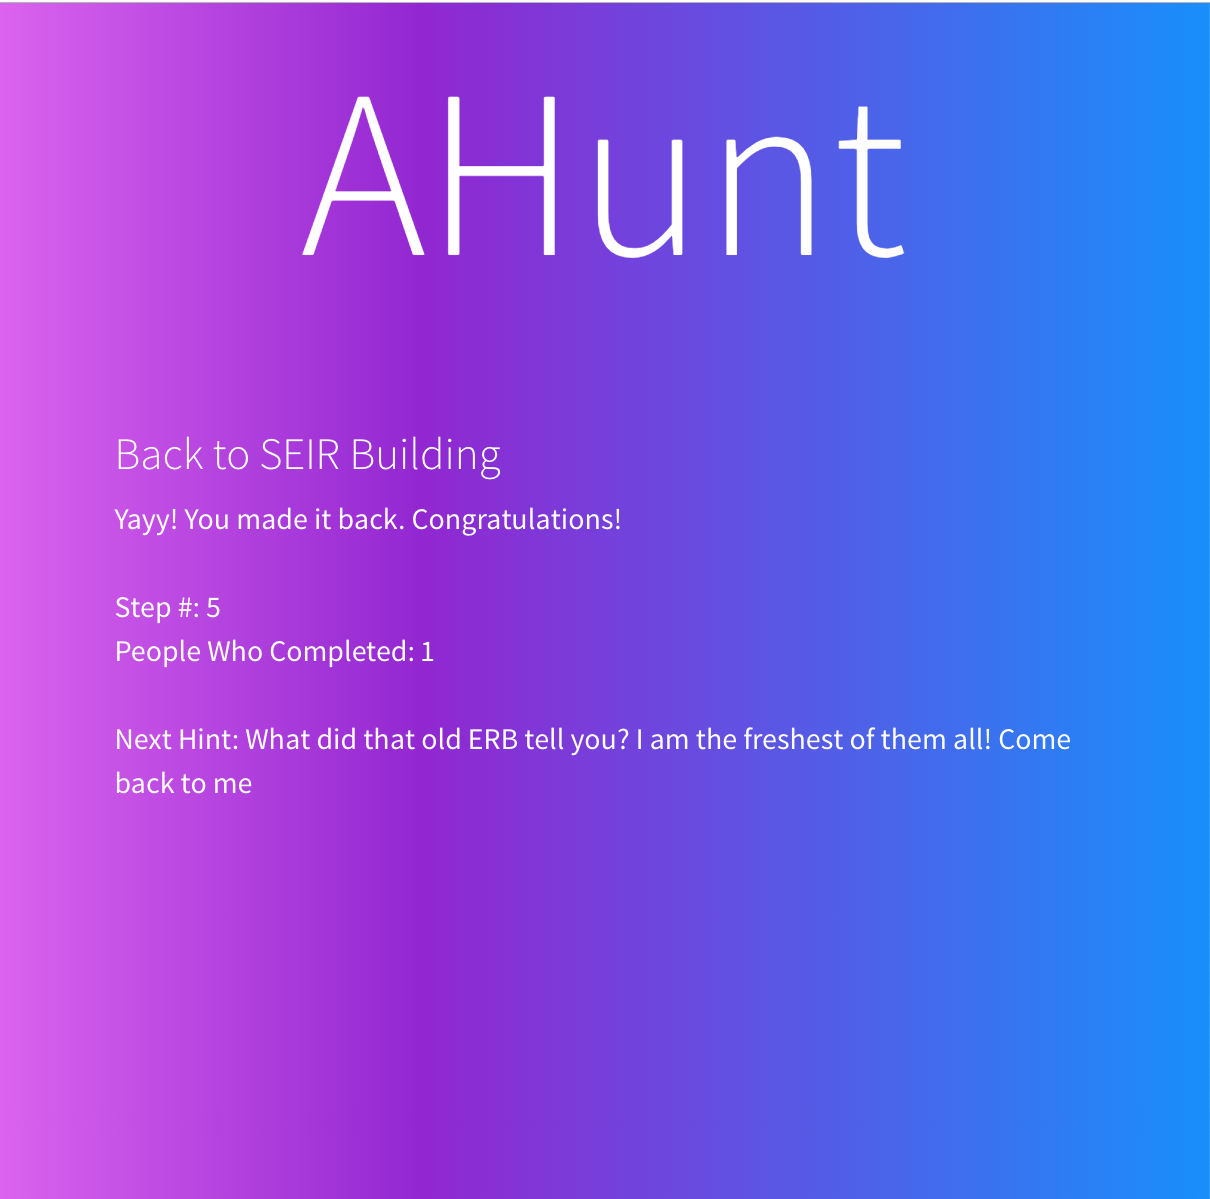 First ahunt slide